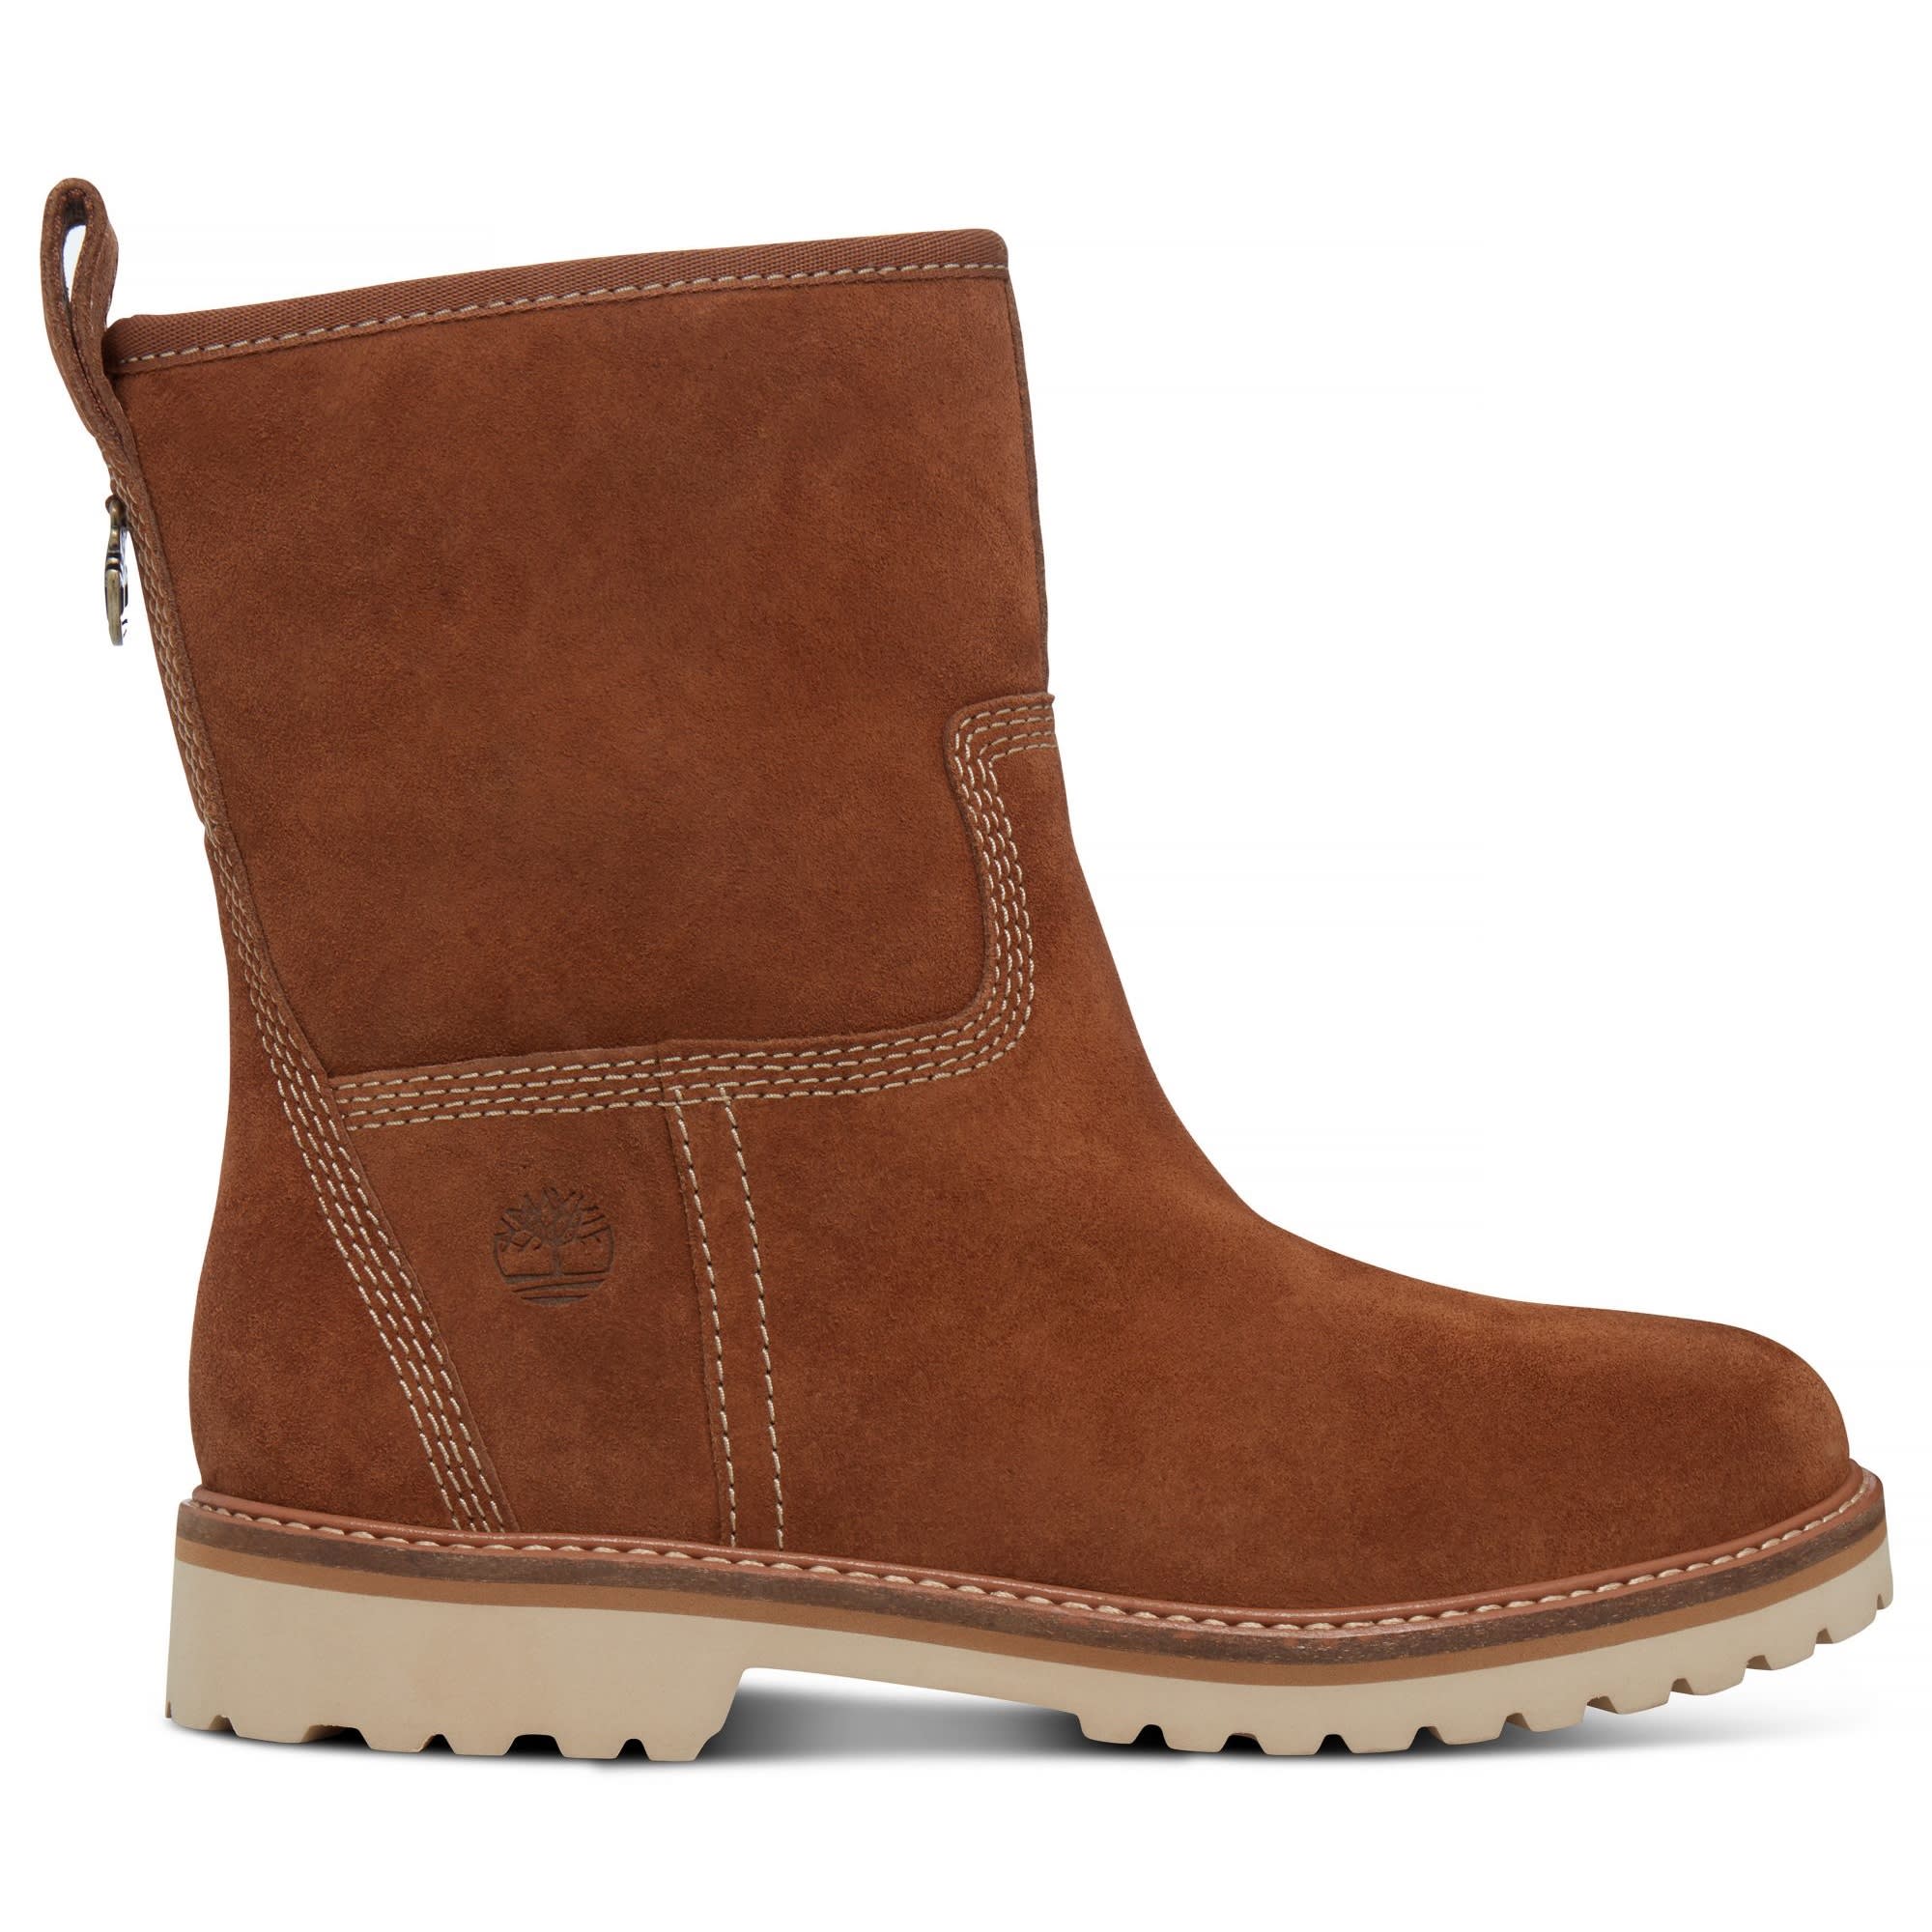 Taxi compañerismo gusano Buy Timberland Women's Chamonix Valley Waterproof Boot from Outnorth